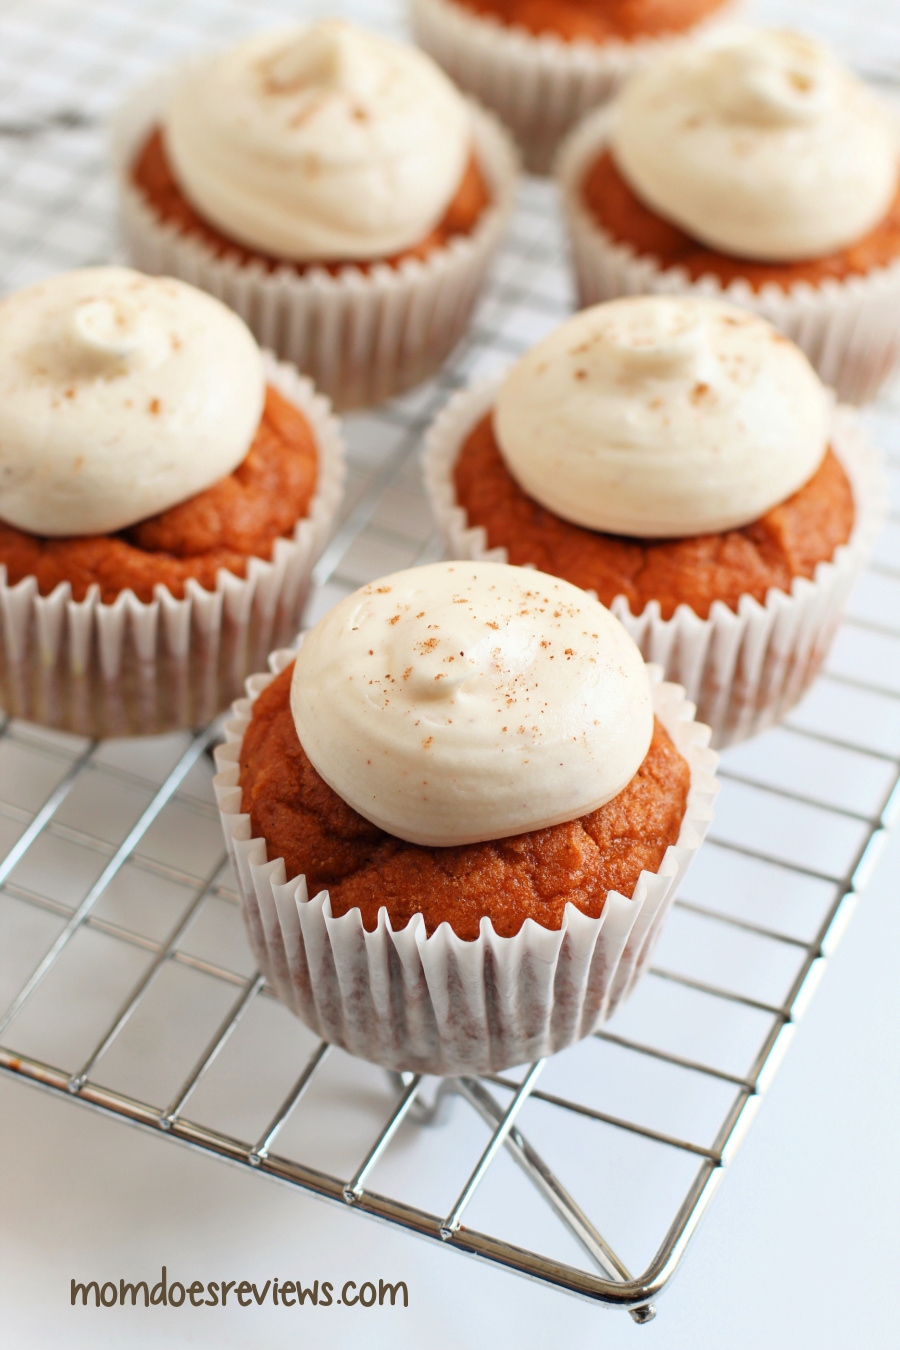 Pumpkin Spice Cupcakes with Cream Cheese Frosting (Gluten Free)